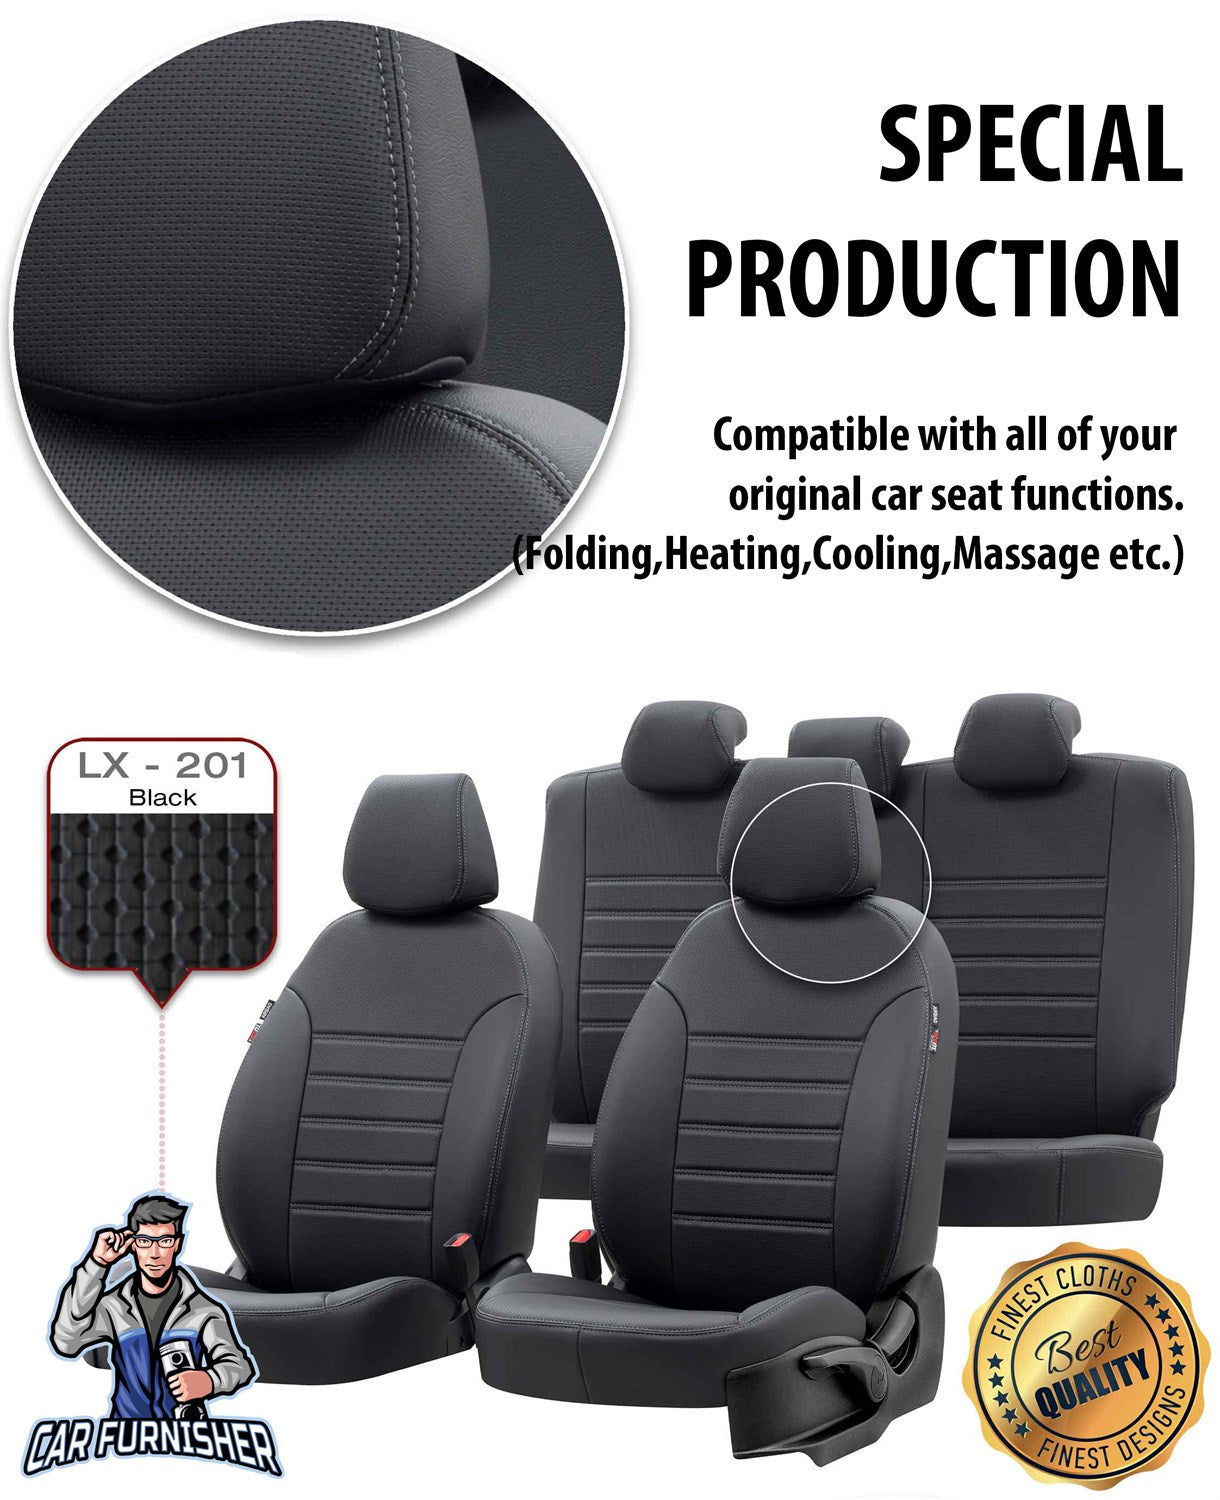 Volvo XC60 Car Seat Cover 2008-2017 D3/D4/D5/T5/T6 New York Design Black Leather & Fabric